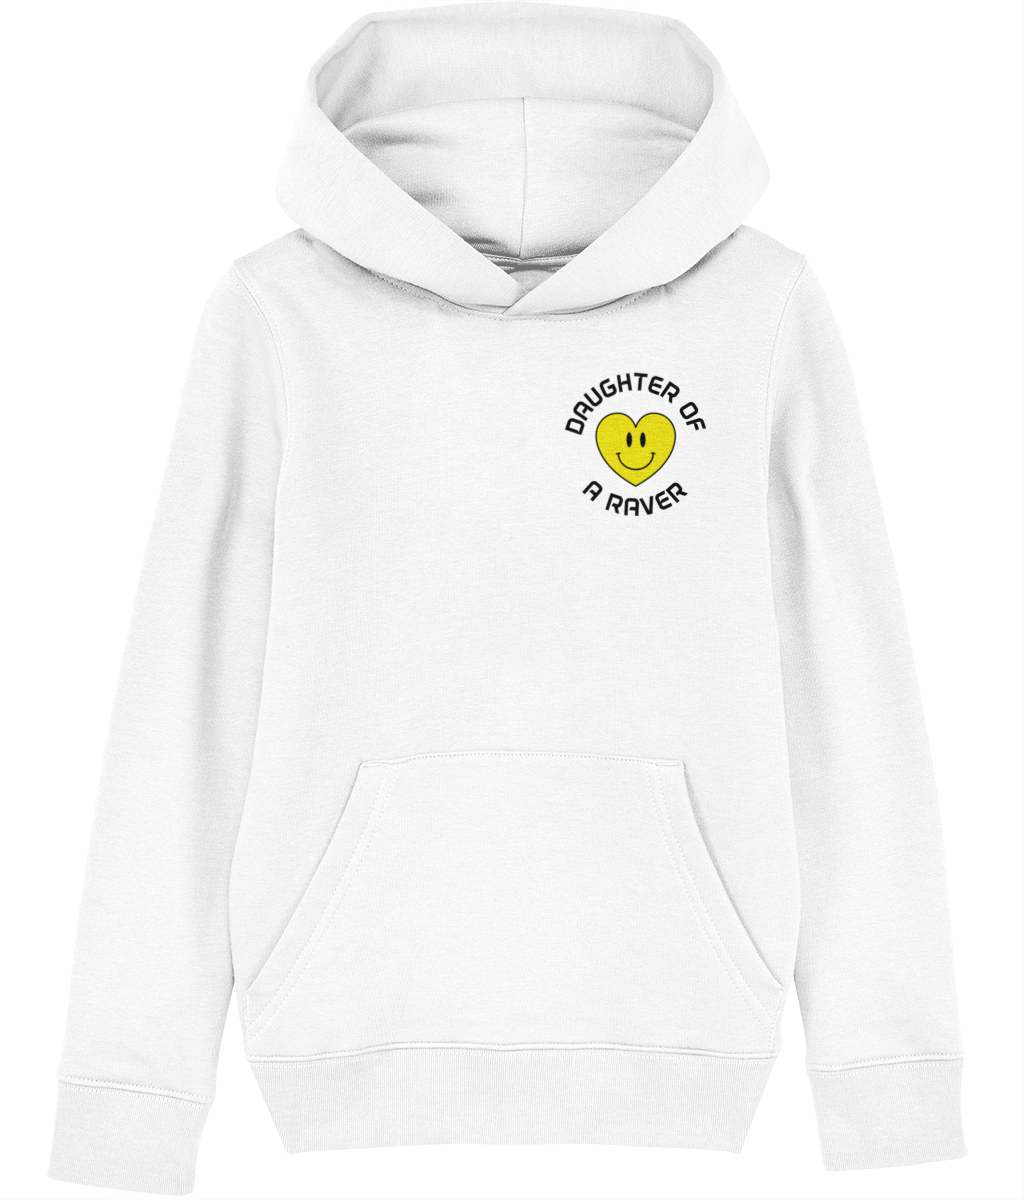 Printed Back and Front, Organic Cotton Junior Hoodie, Daughter Of A Raver :)